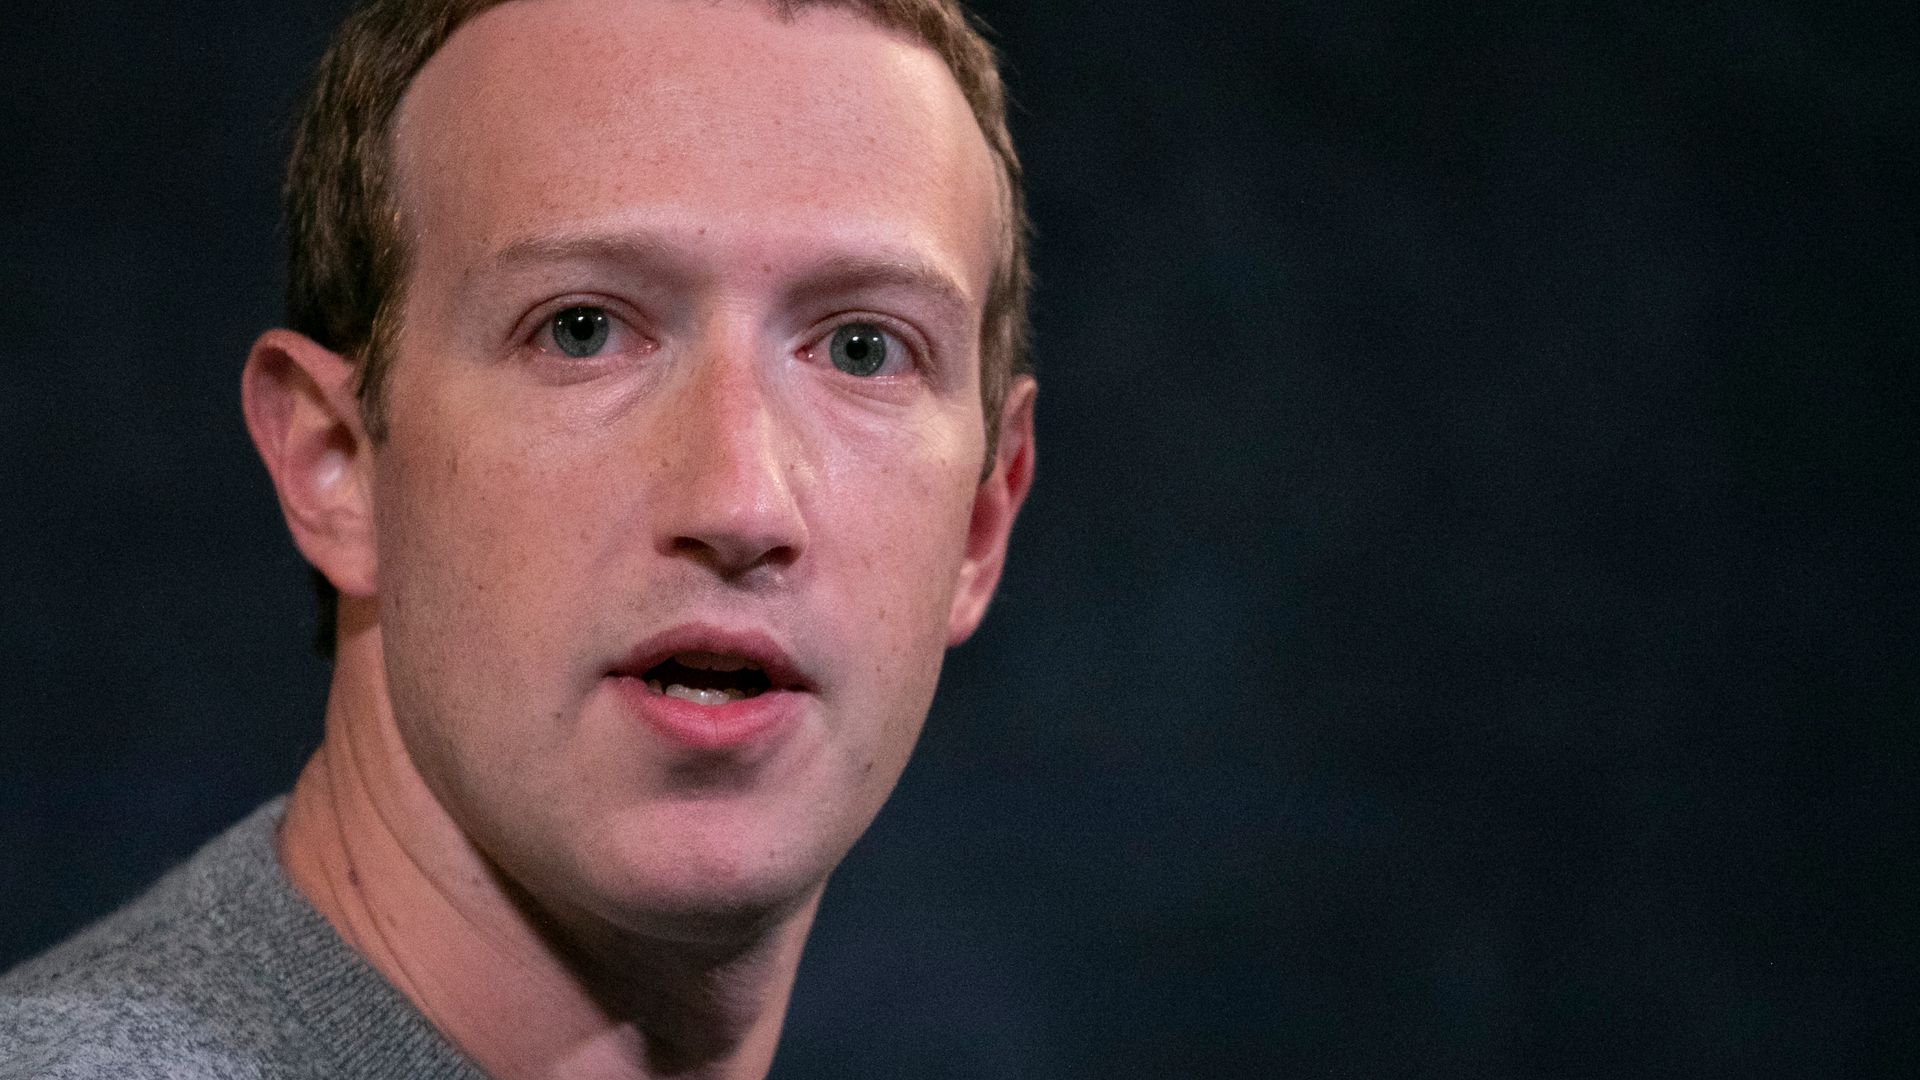 Billionaire Mark Zuckerberg’s expensive blast-proof bunker in Hawaii raises alarming questions about the future state of the world.